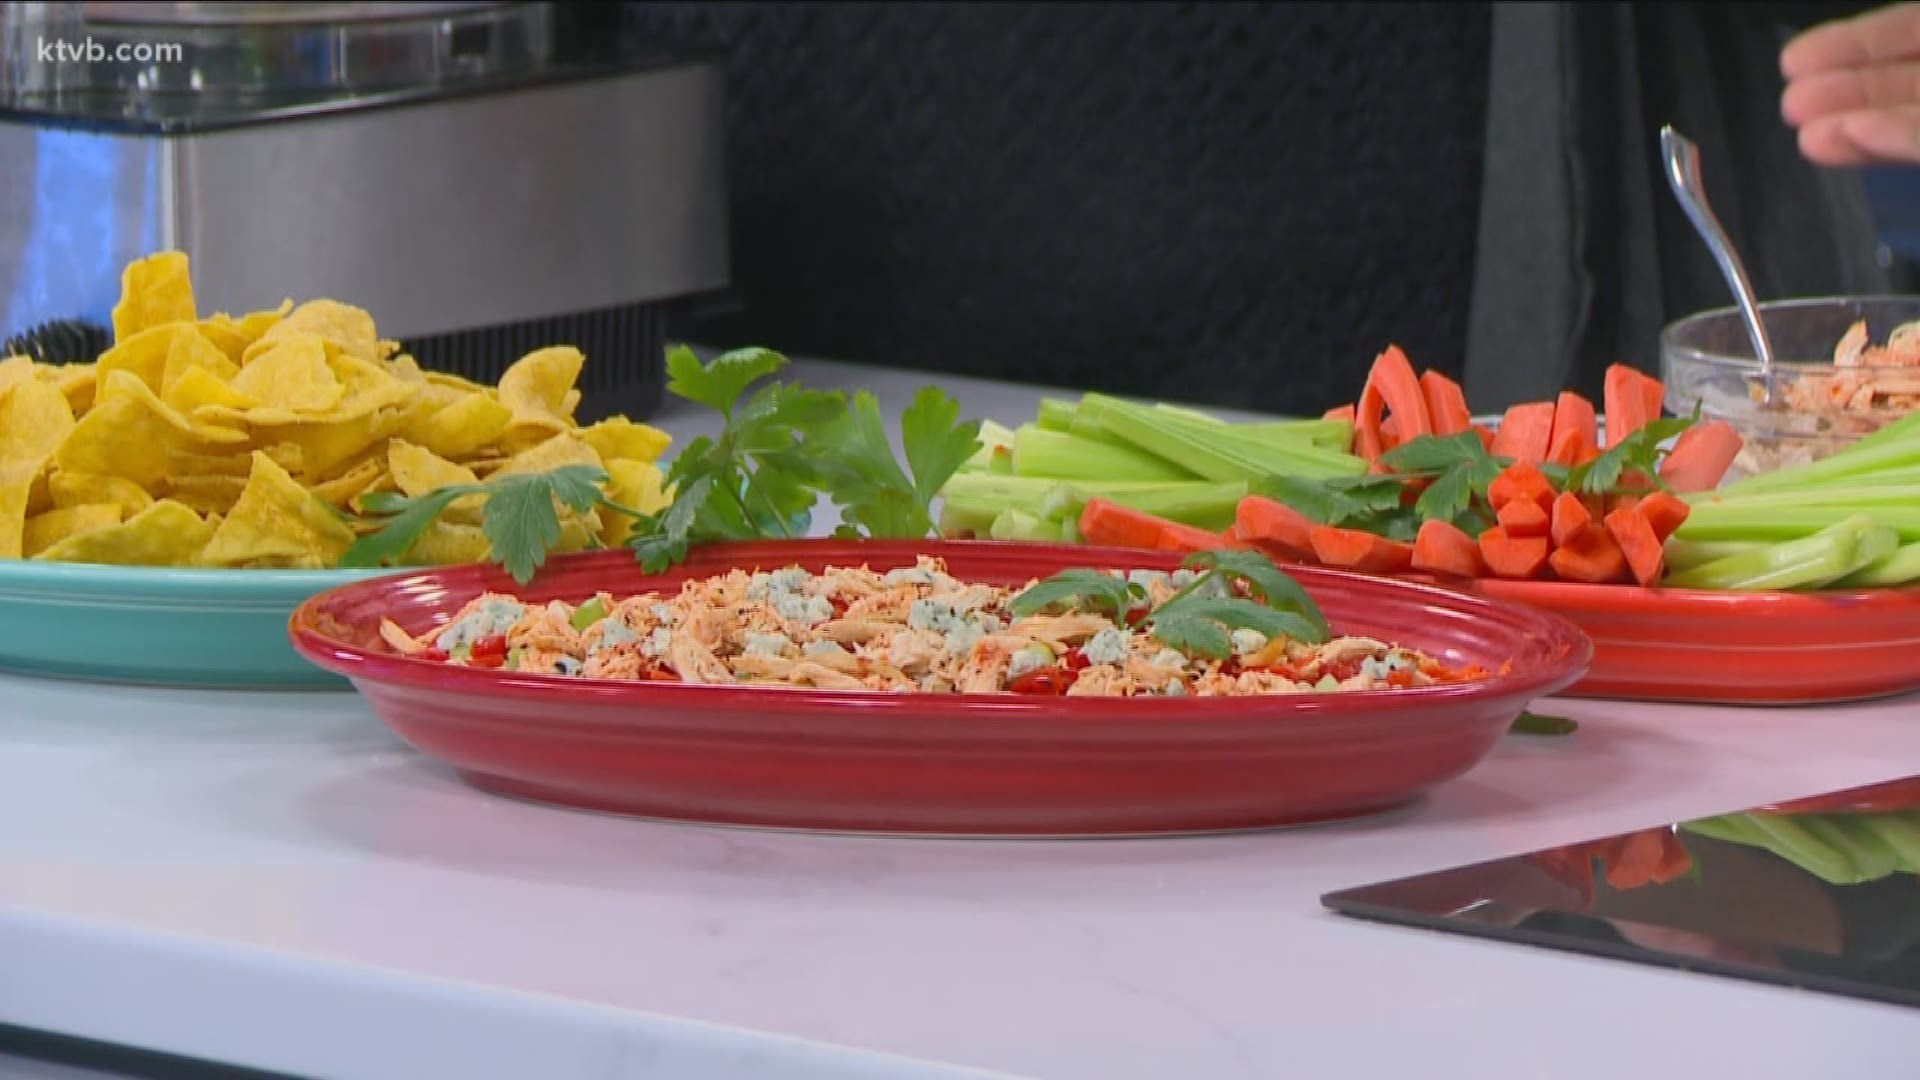 Chef Lori Renn shows us a light and healthy recipe to enjoy on Game Day.